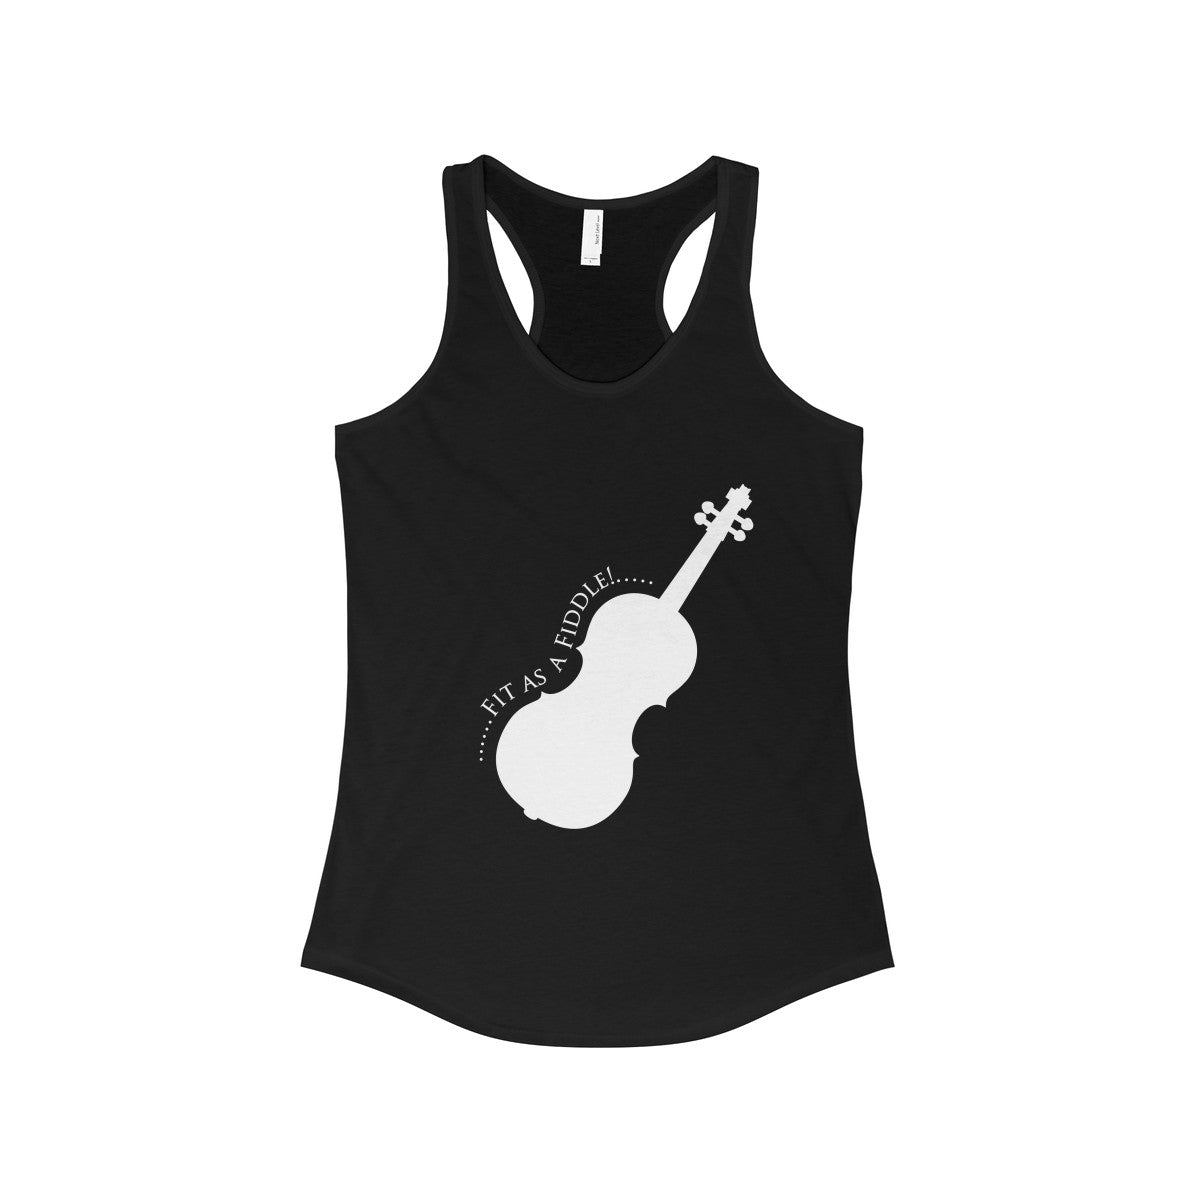 Fit as a Fiddle! Women's The Ideal Racerback Tank-Tank Top-PureDesignTees